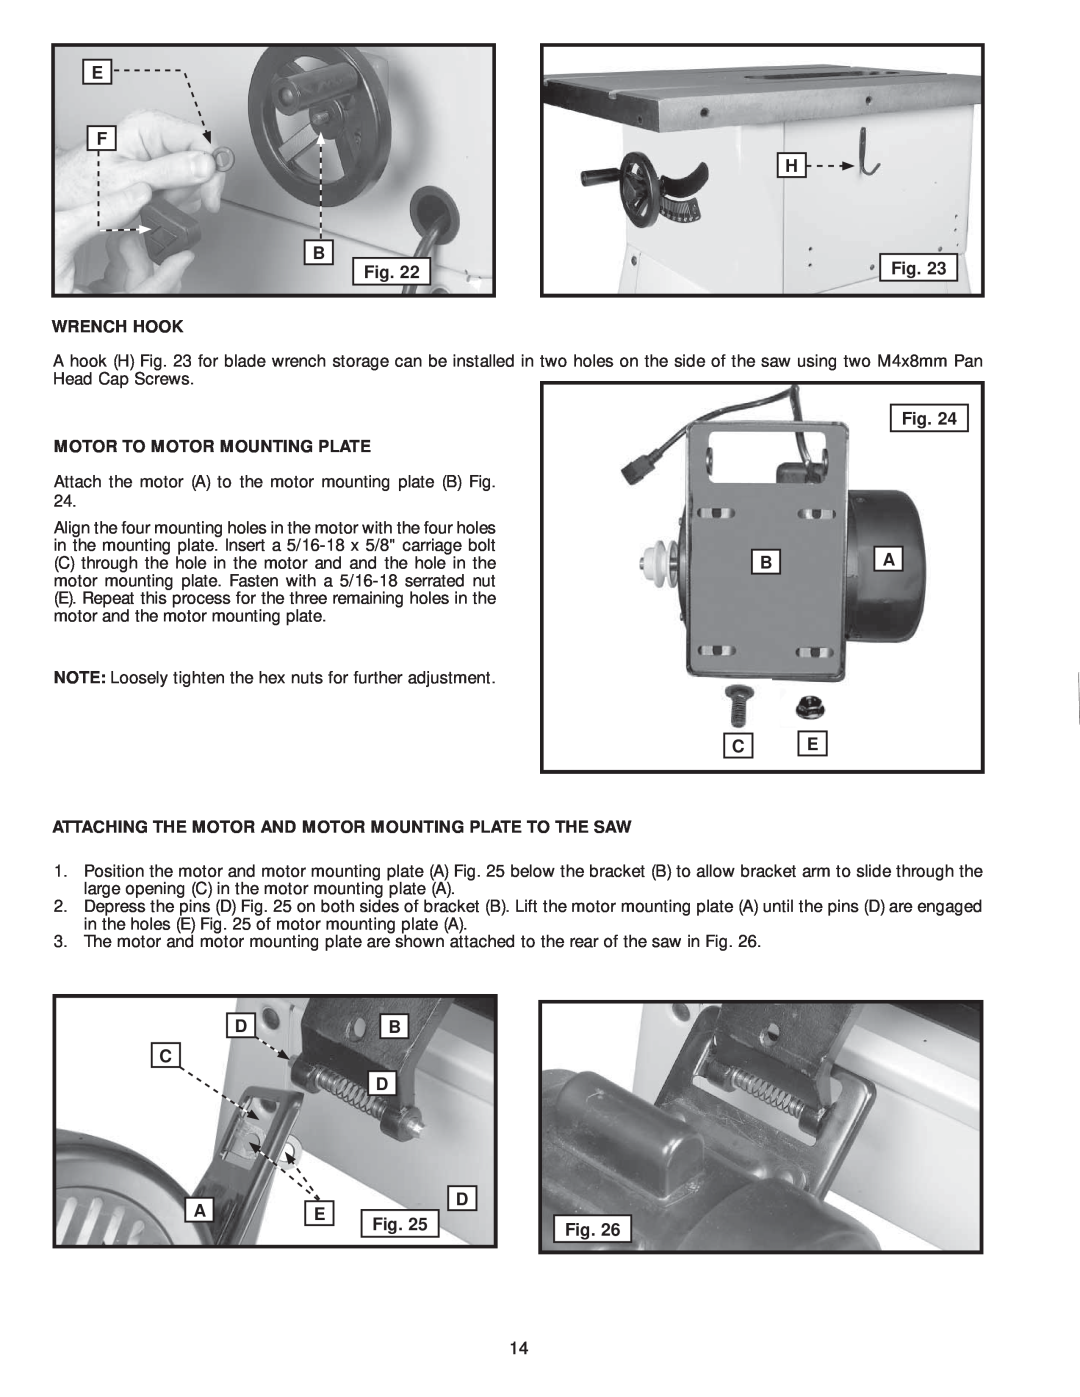 Delta 36-979, 36-978 instruction manual Attach the motor A to the motor mounting plate B Fig 